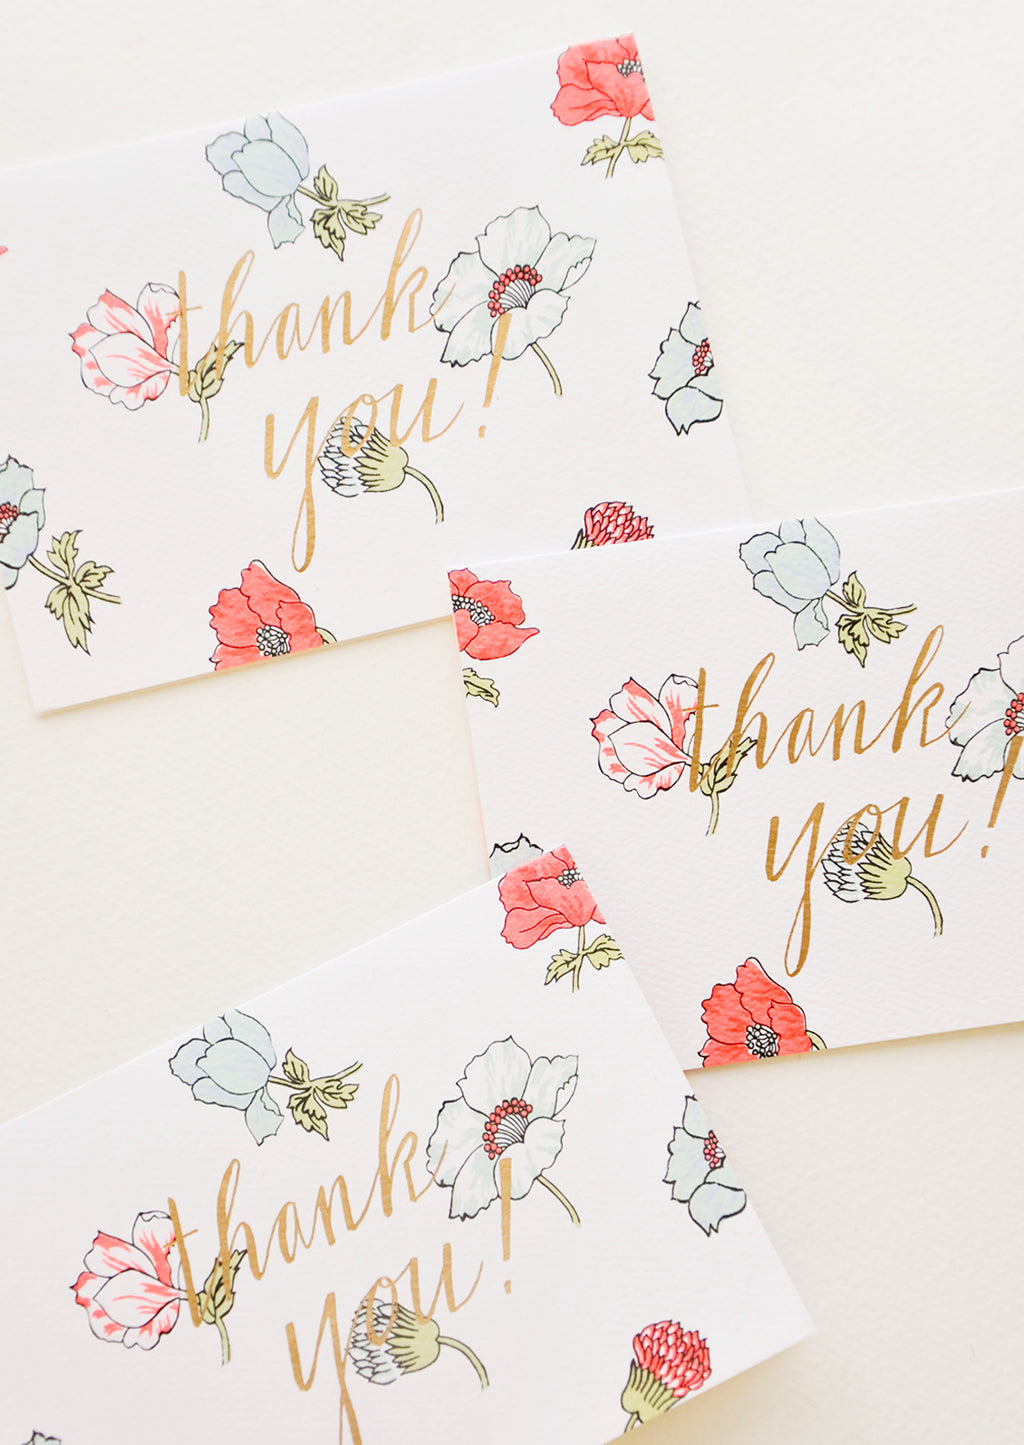 1: Set of notecards with neon flowers and the text "Thank you!" in gold foil.